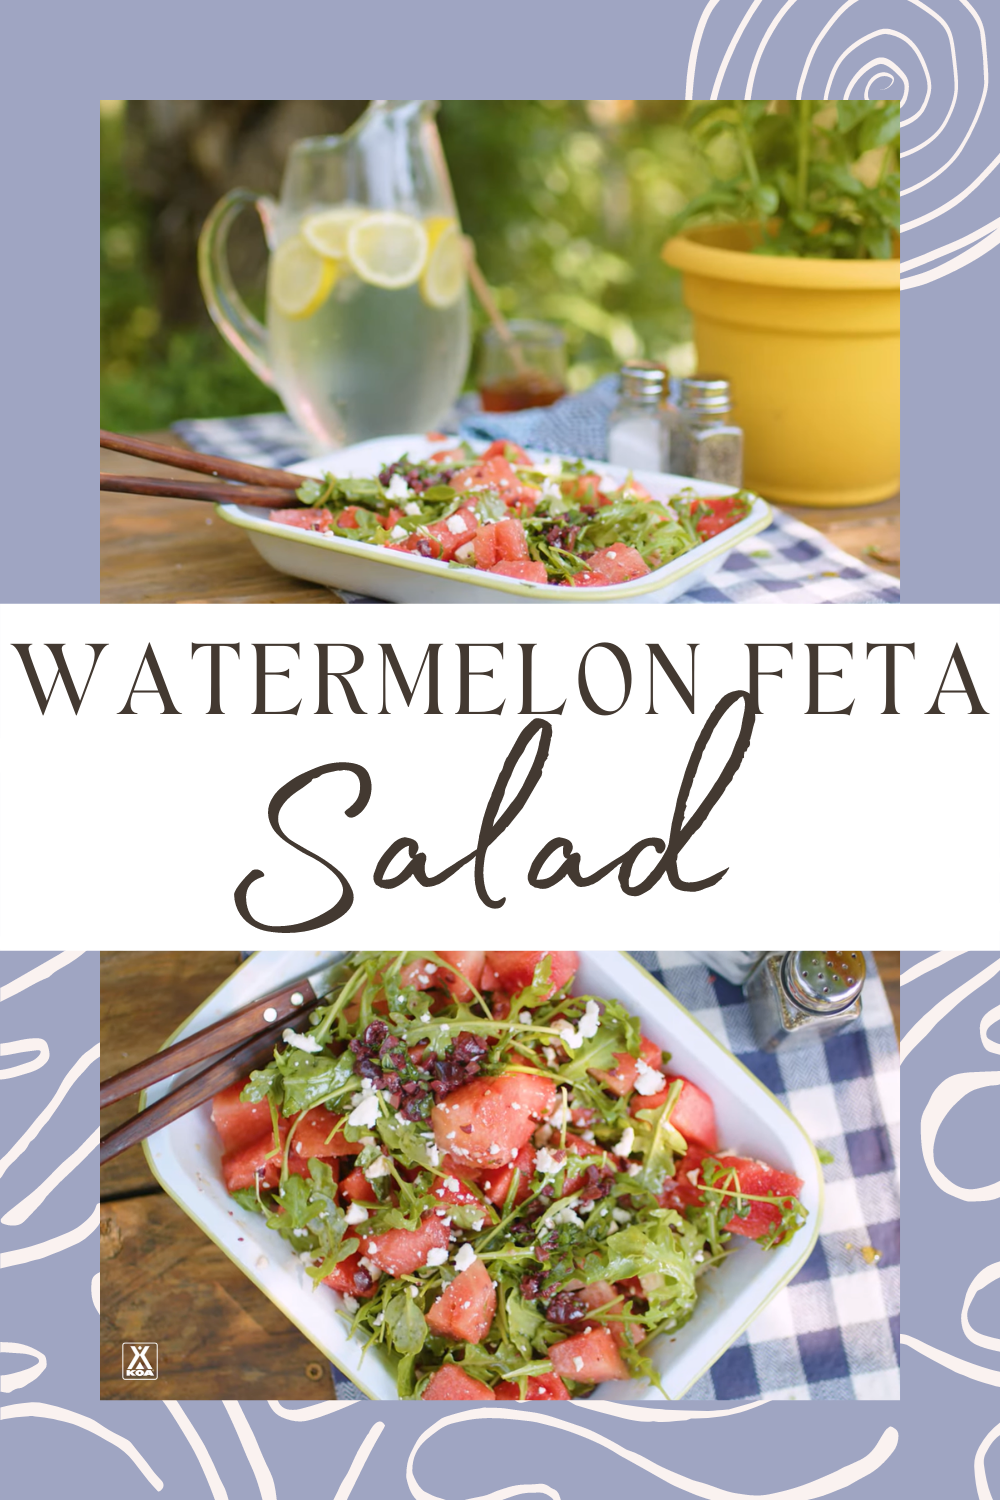 Shake up the fruit you add to a salad with this refreshing combination of melon, feta, herbs and olives. 